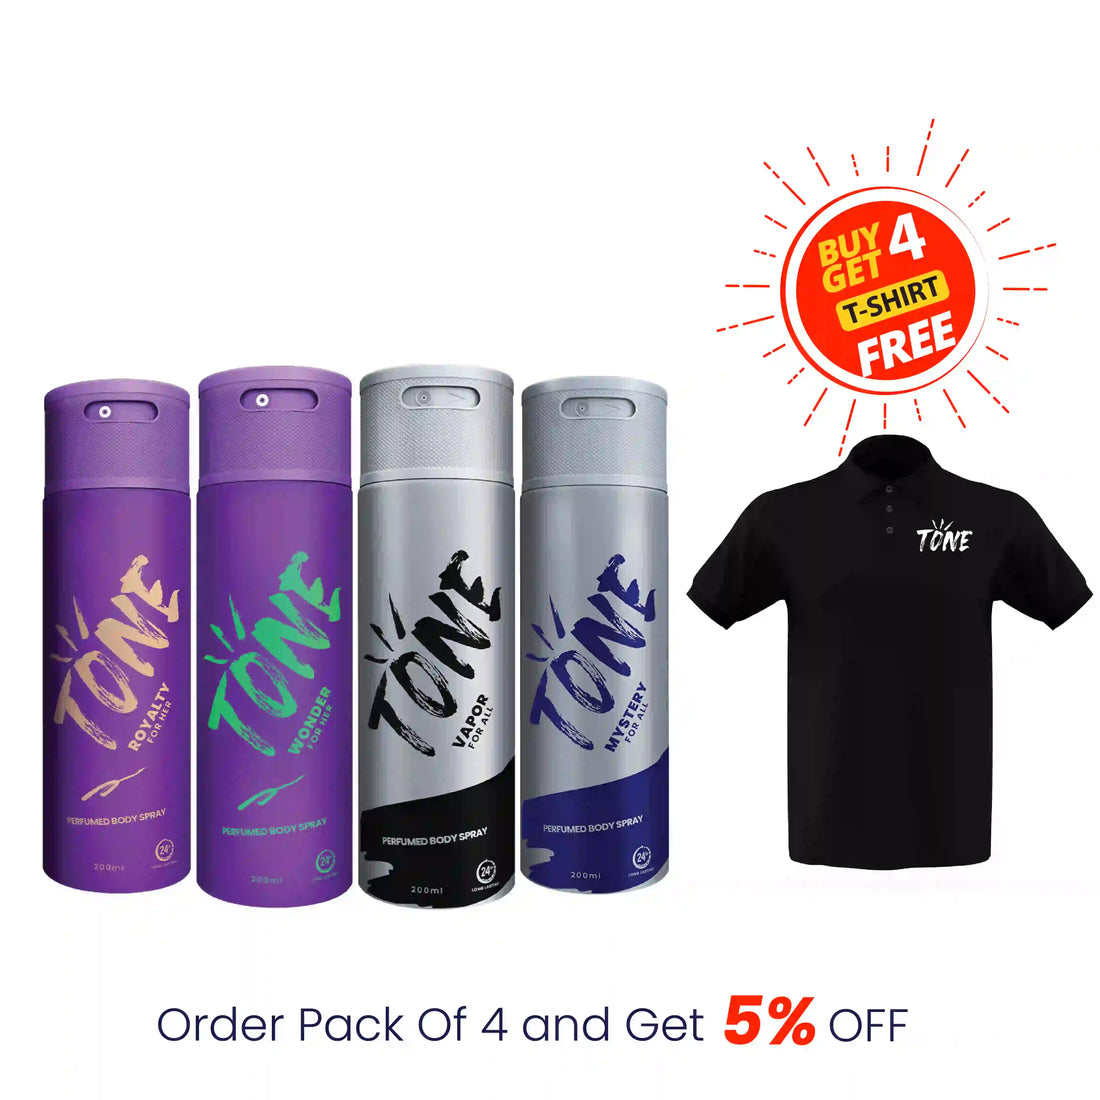 Pack of 4 (Royalty, wonder, vapor and mystery) with free T-Shirt